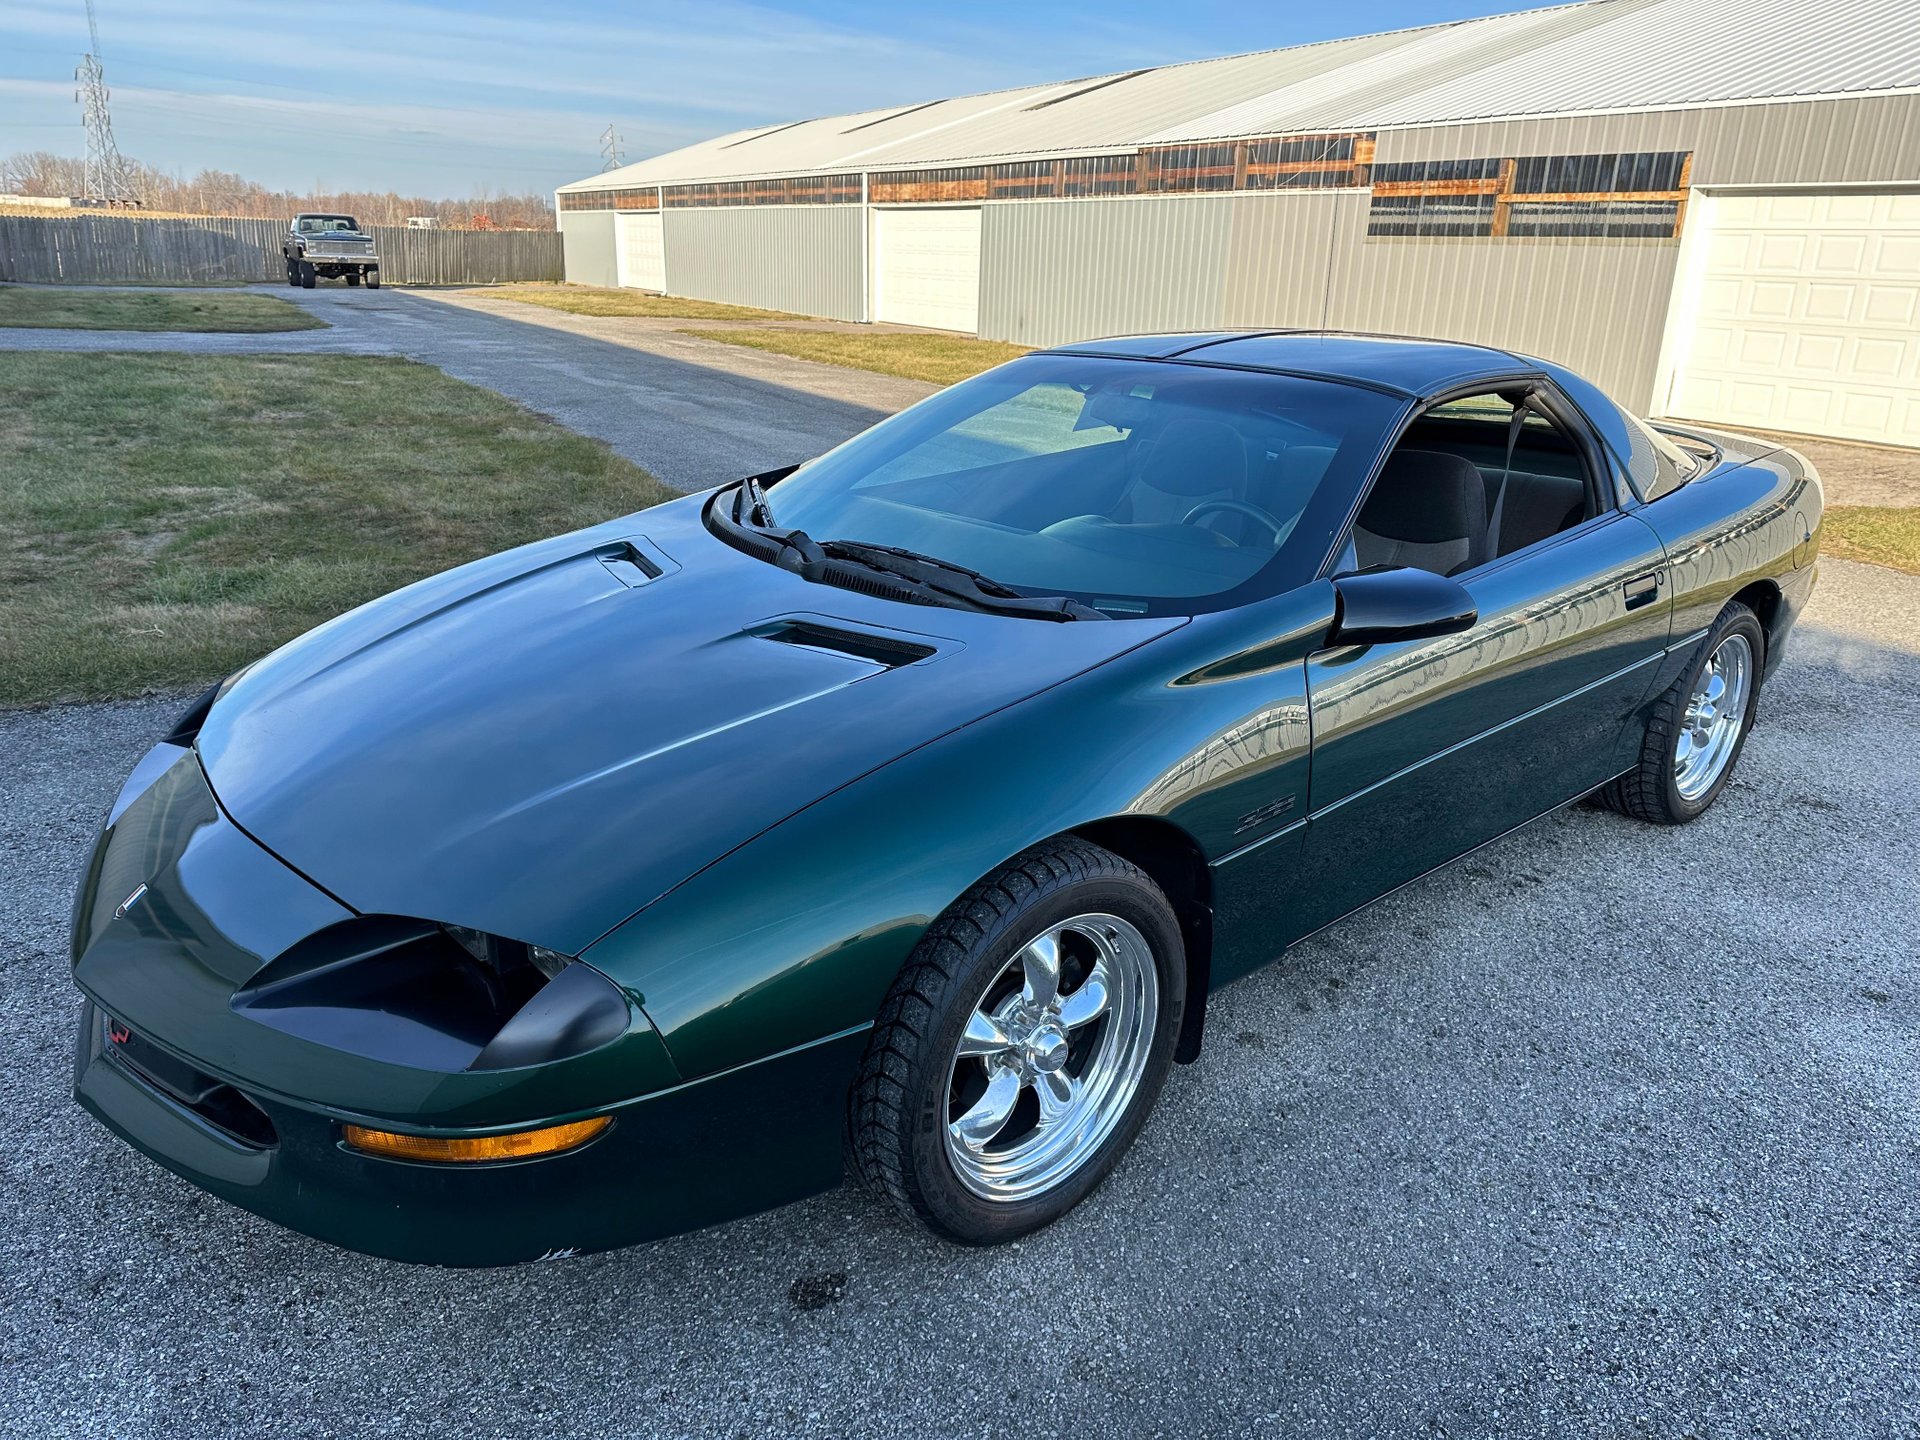 1995 Chevrolet Camaro | Country Classic Cars